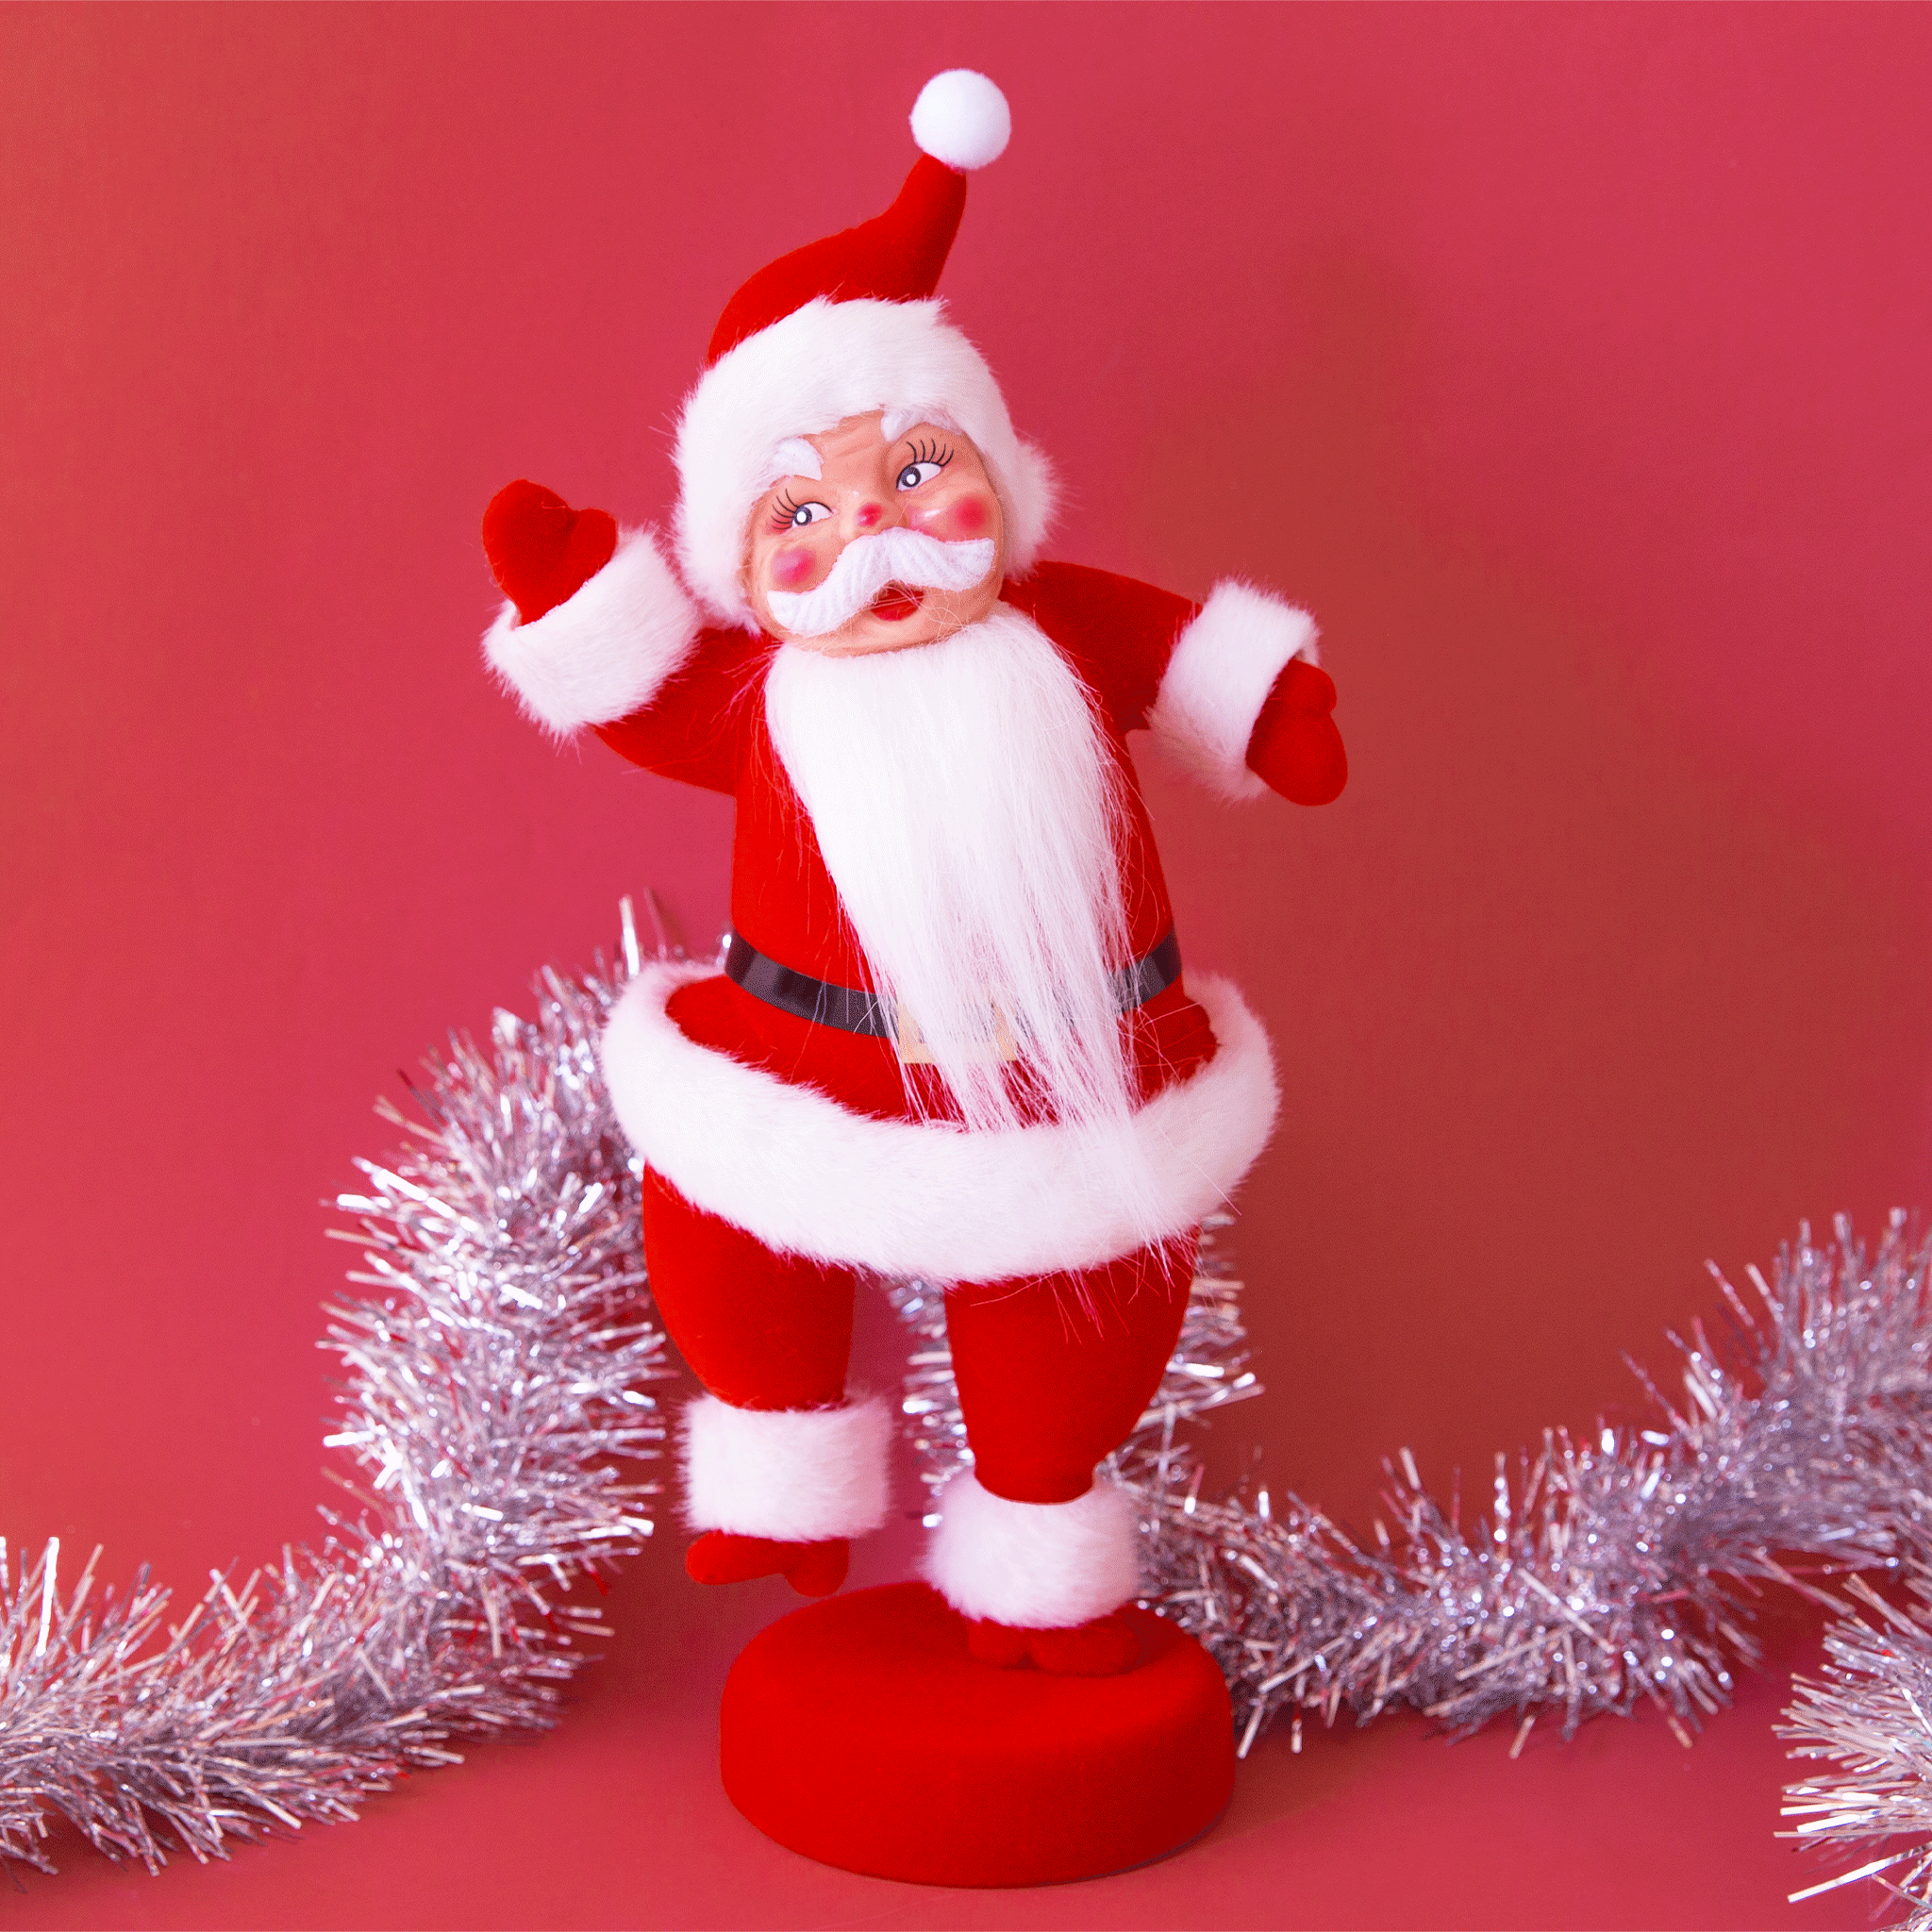 A plastic Santa figurine with a red suit and furry detailing on the cuffs, jacket and hat.